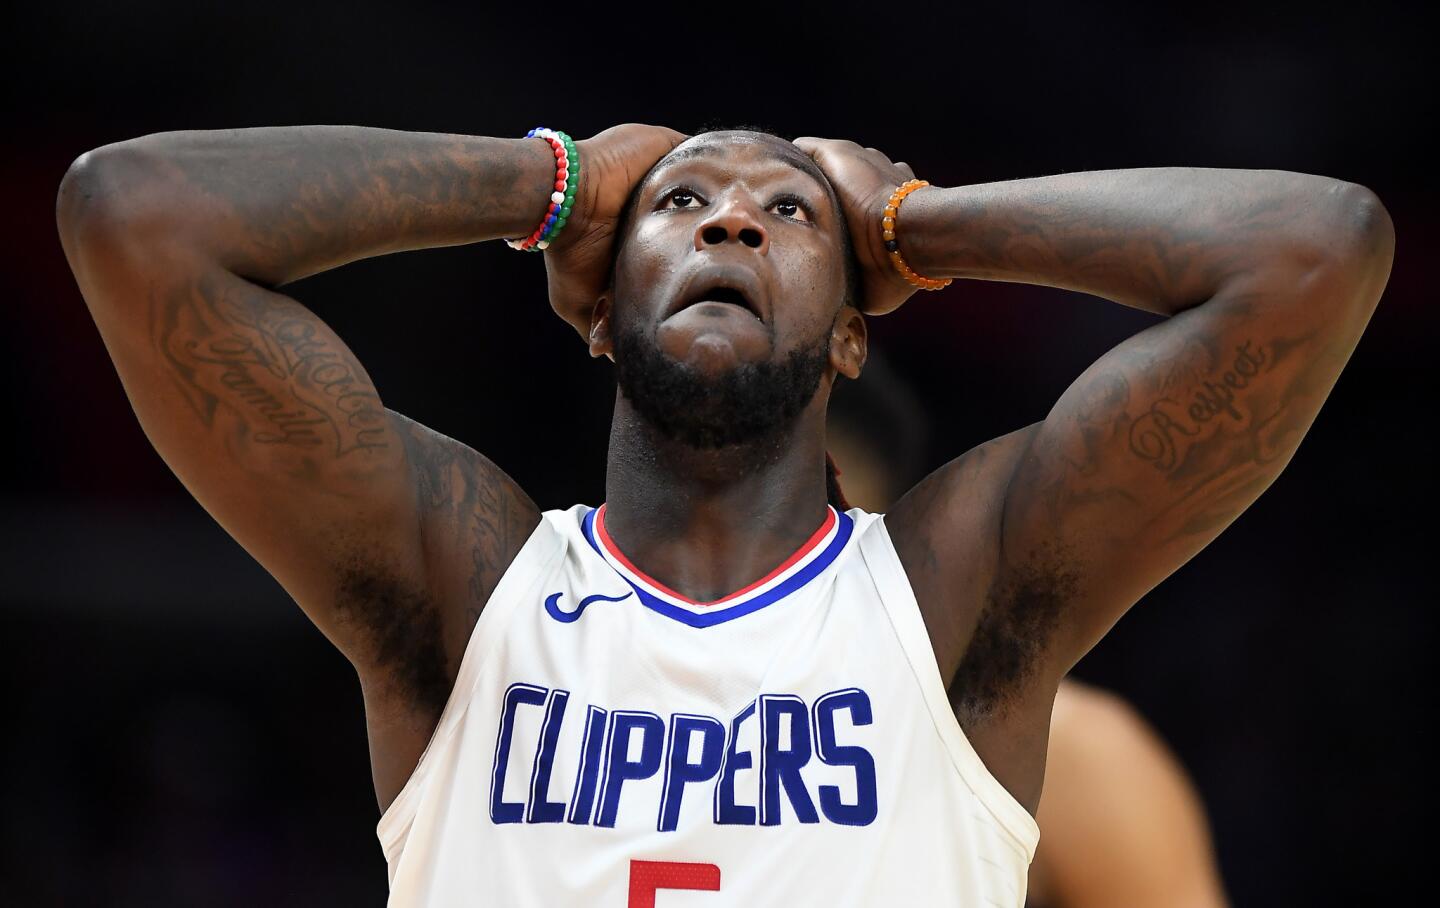 Clippers forward Montrezl Harrell walks down court after being called for a foul against the TImberwolves late in the fourth quarter.